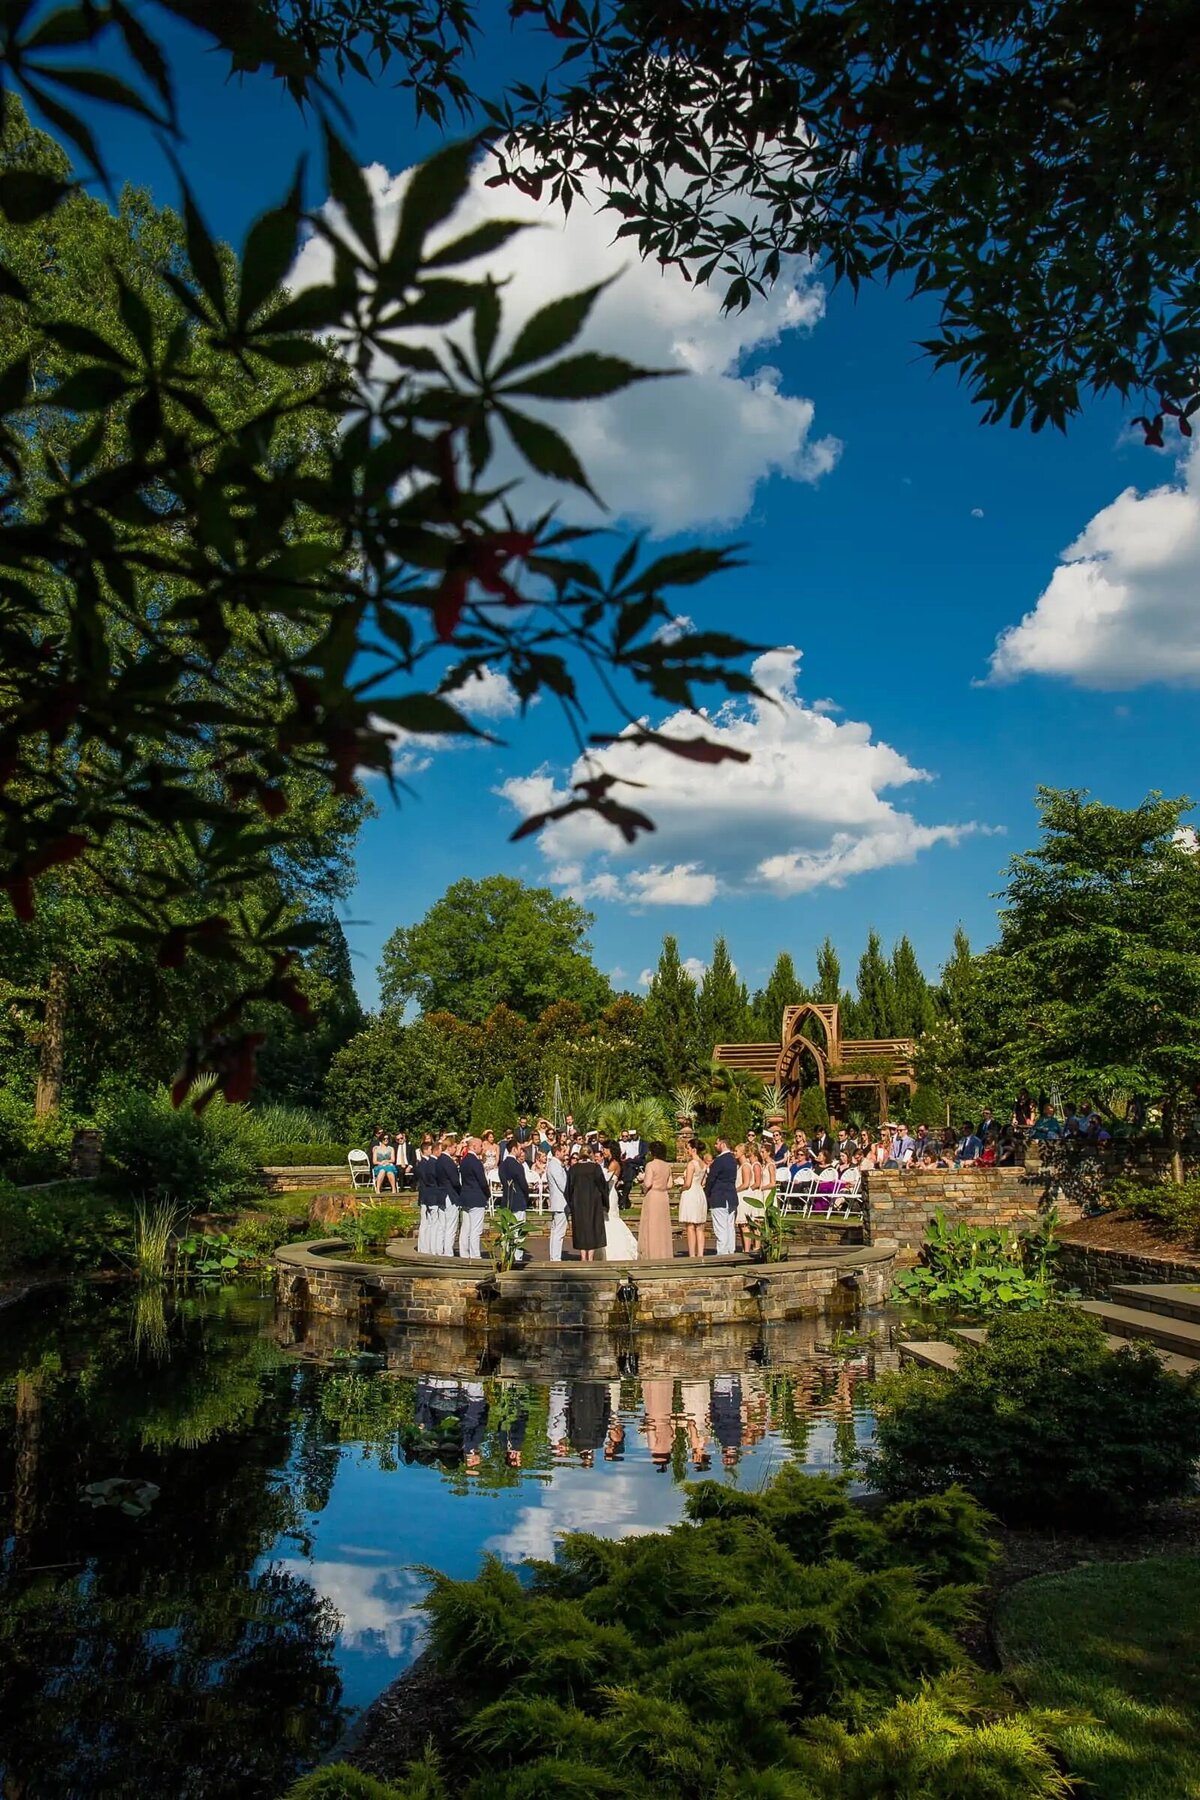 A wedding by a serene pond at Duke Gardens, the tranquil water reflecting the clear blue sky above